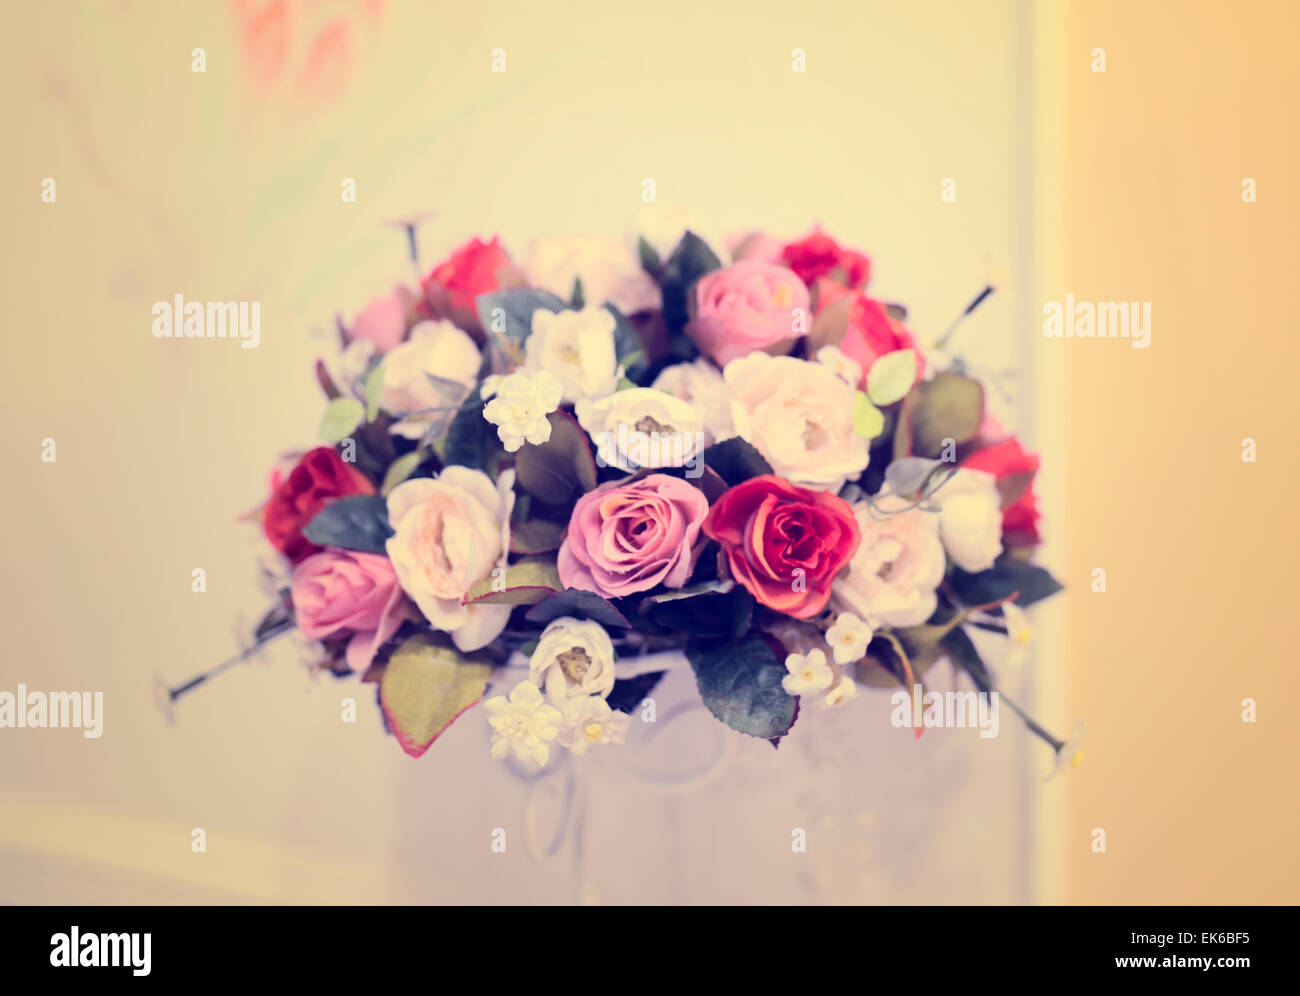 Bridal bouquet of various flowers Stock Photo